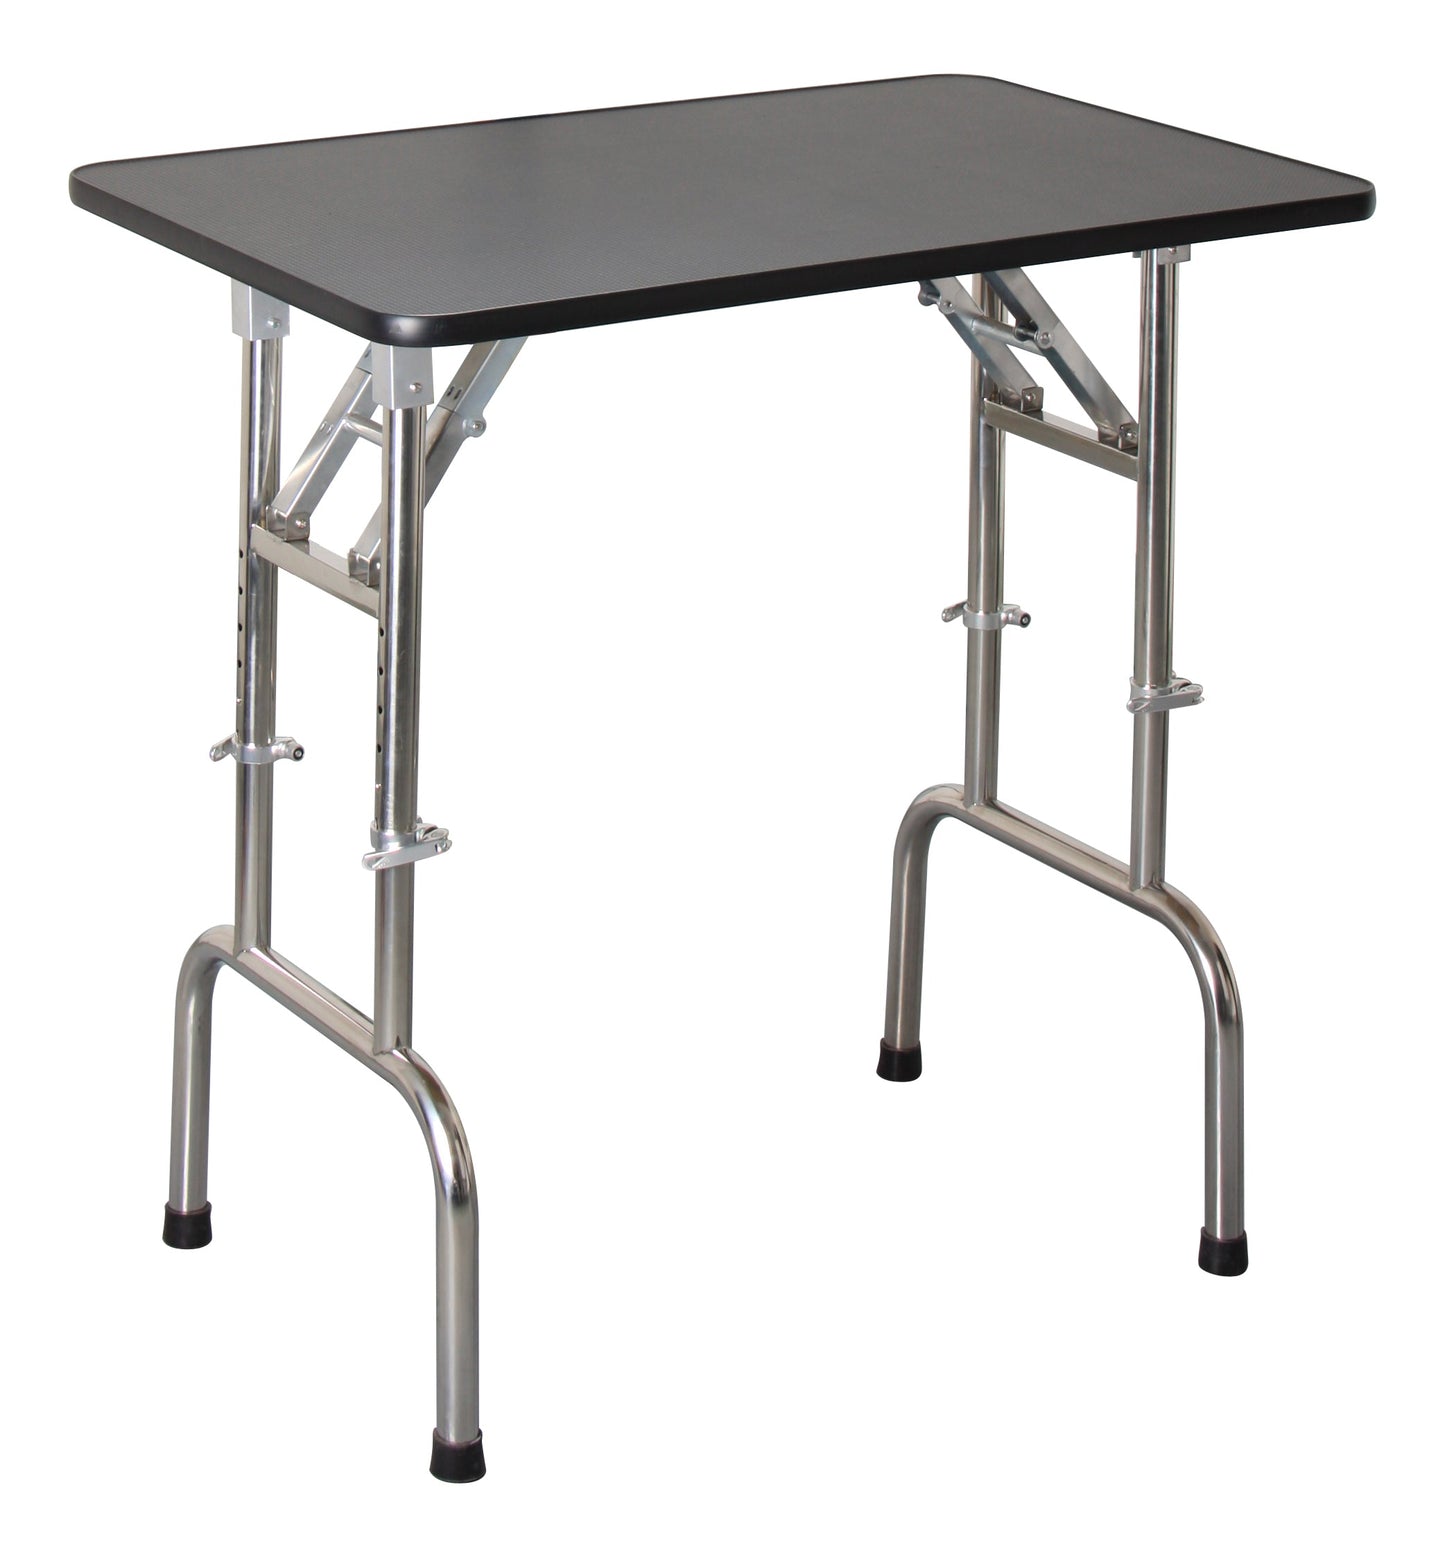 Aeolus Height-Adjustable Folding Grooming Table with Stainless Steel Legs-Grooming Tables-Pet's Choice Supply